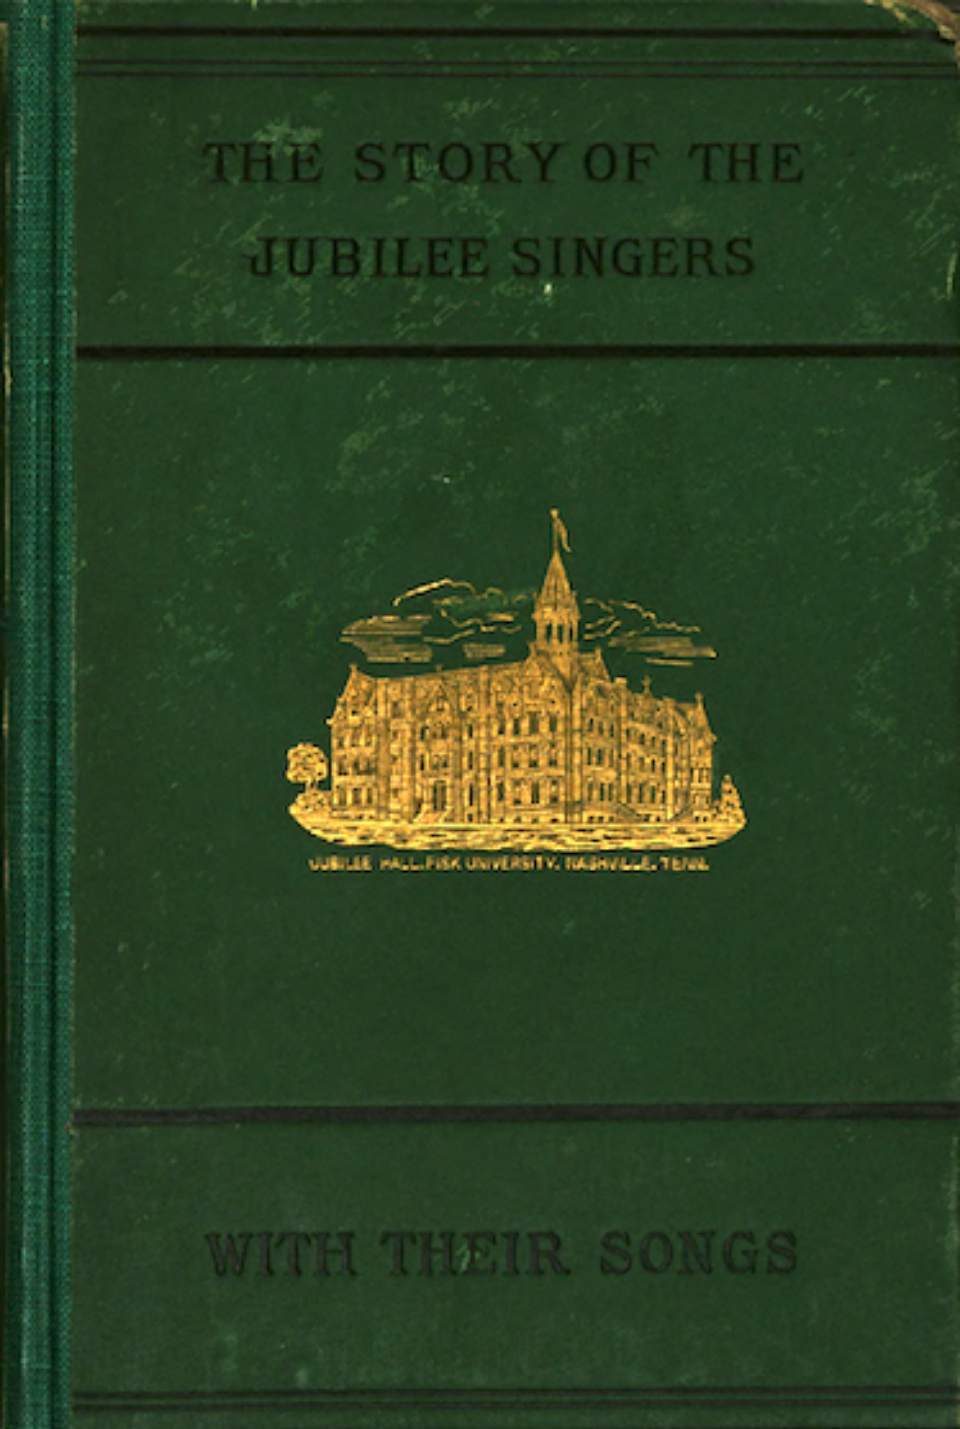 Check out this amazing online resource for more history of the Fisk Jubilee Singers featured in To Wager Her Heart